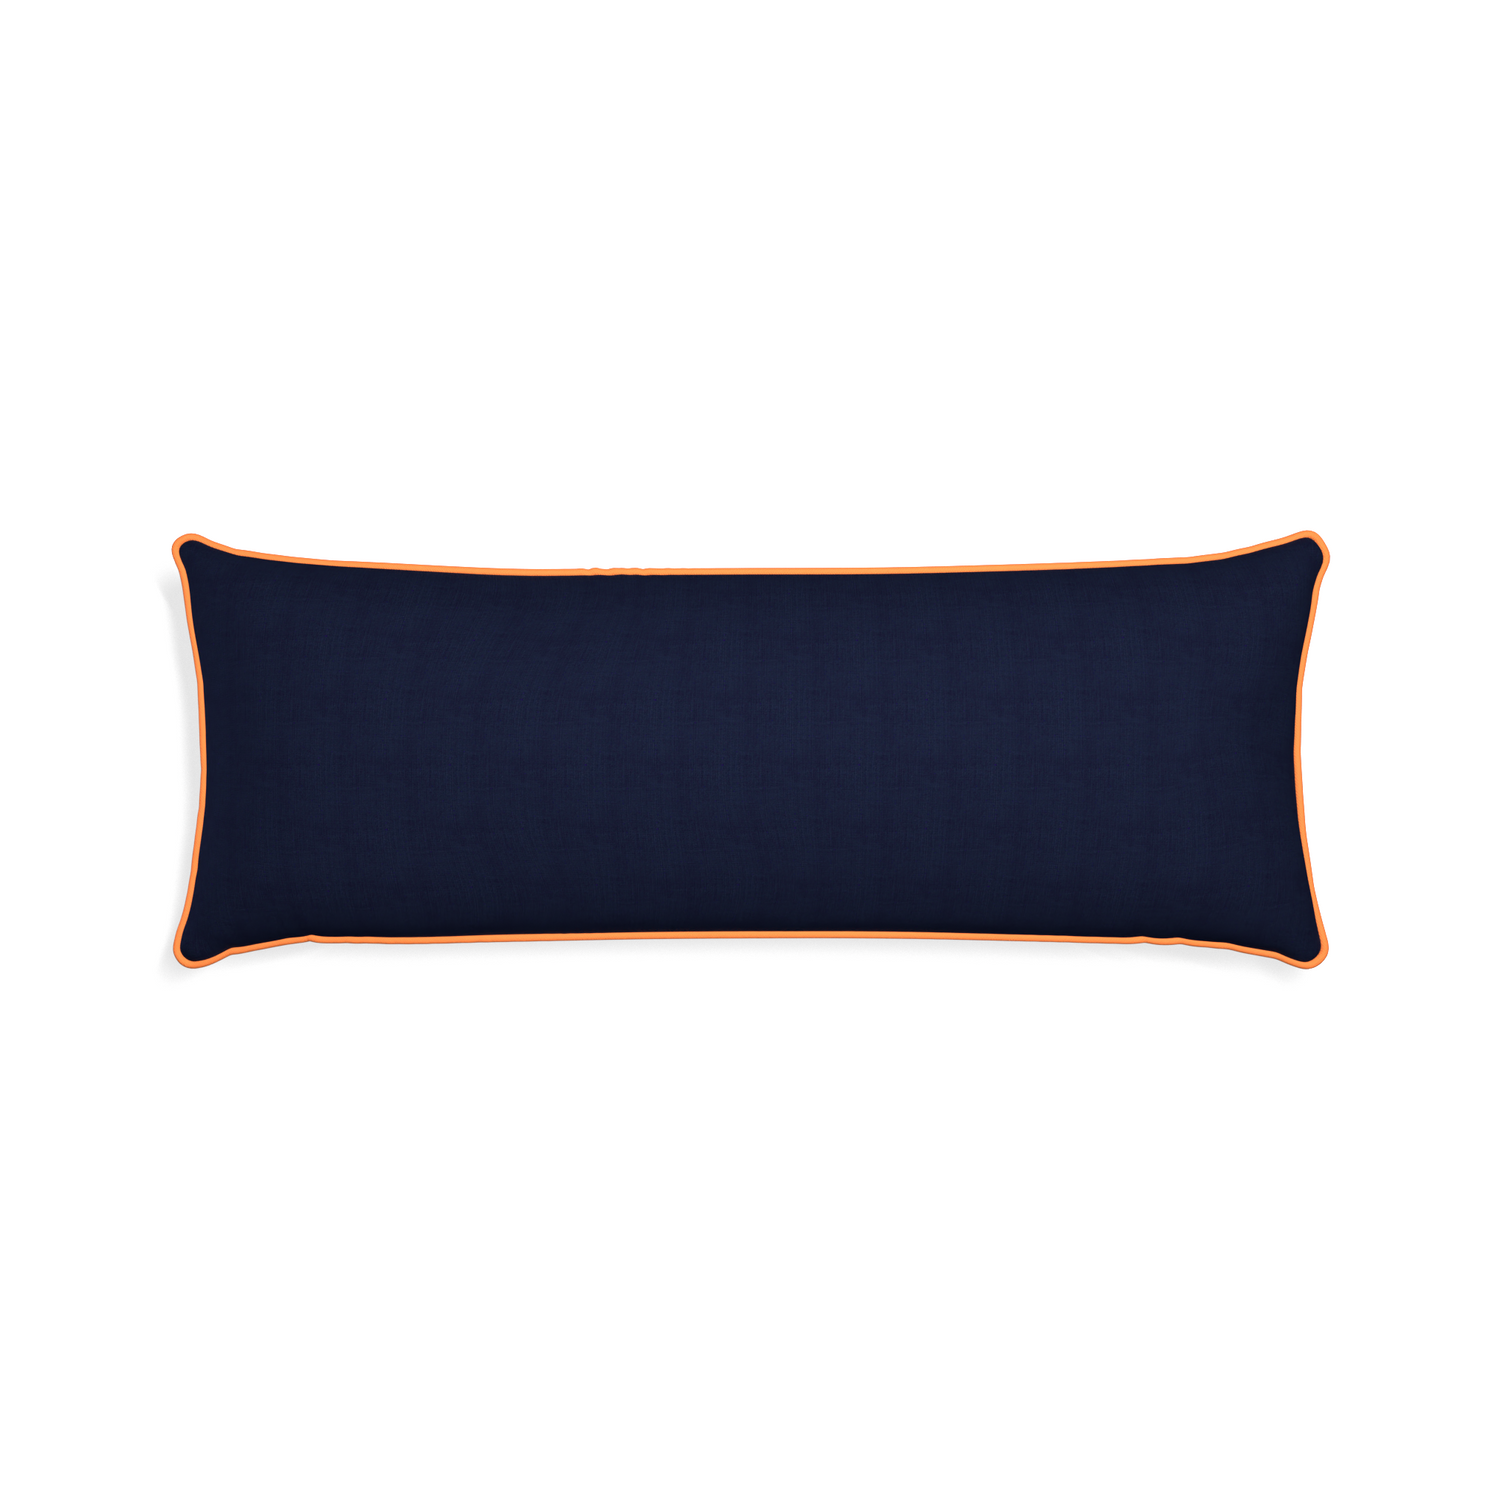 Xl-lumbar midnight custom navy bluepillow with clementine piping on white background